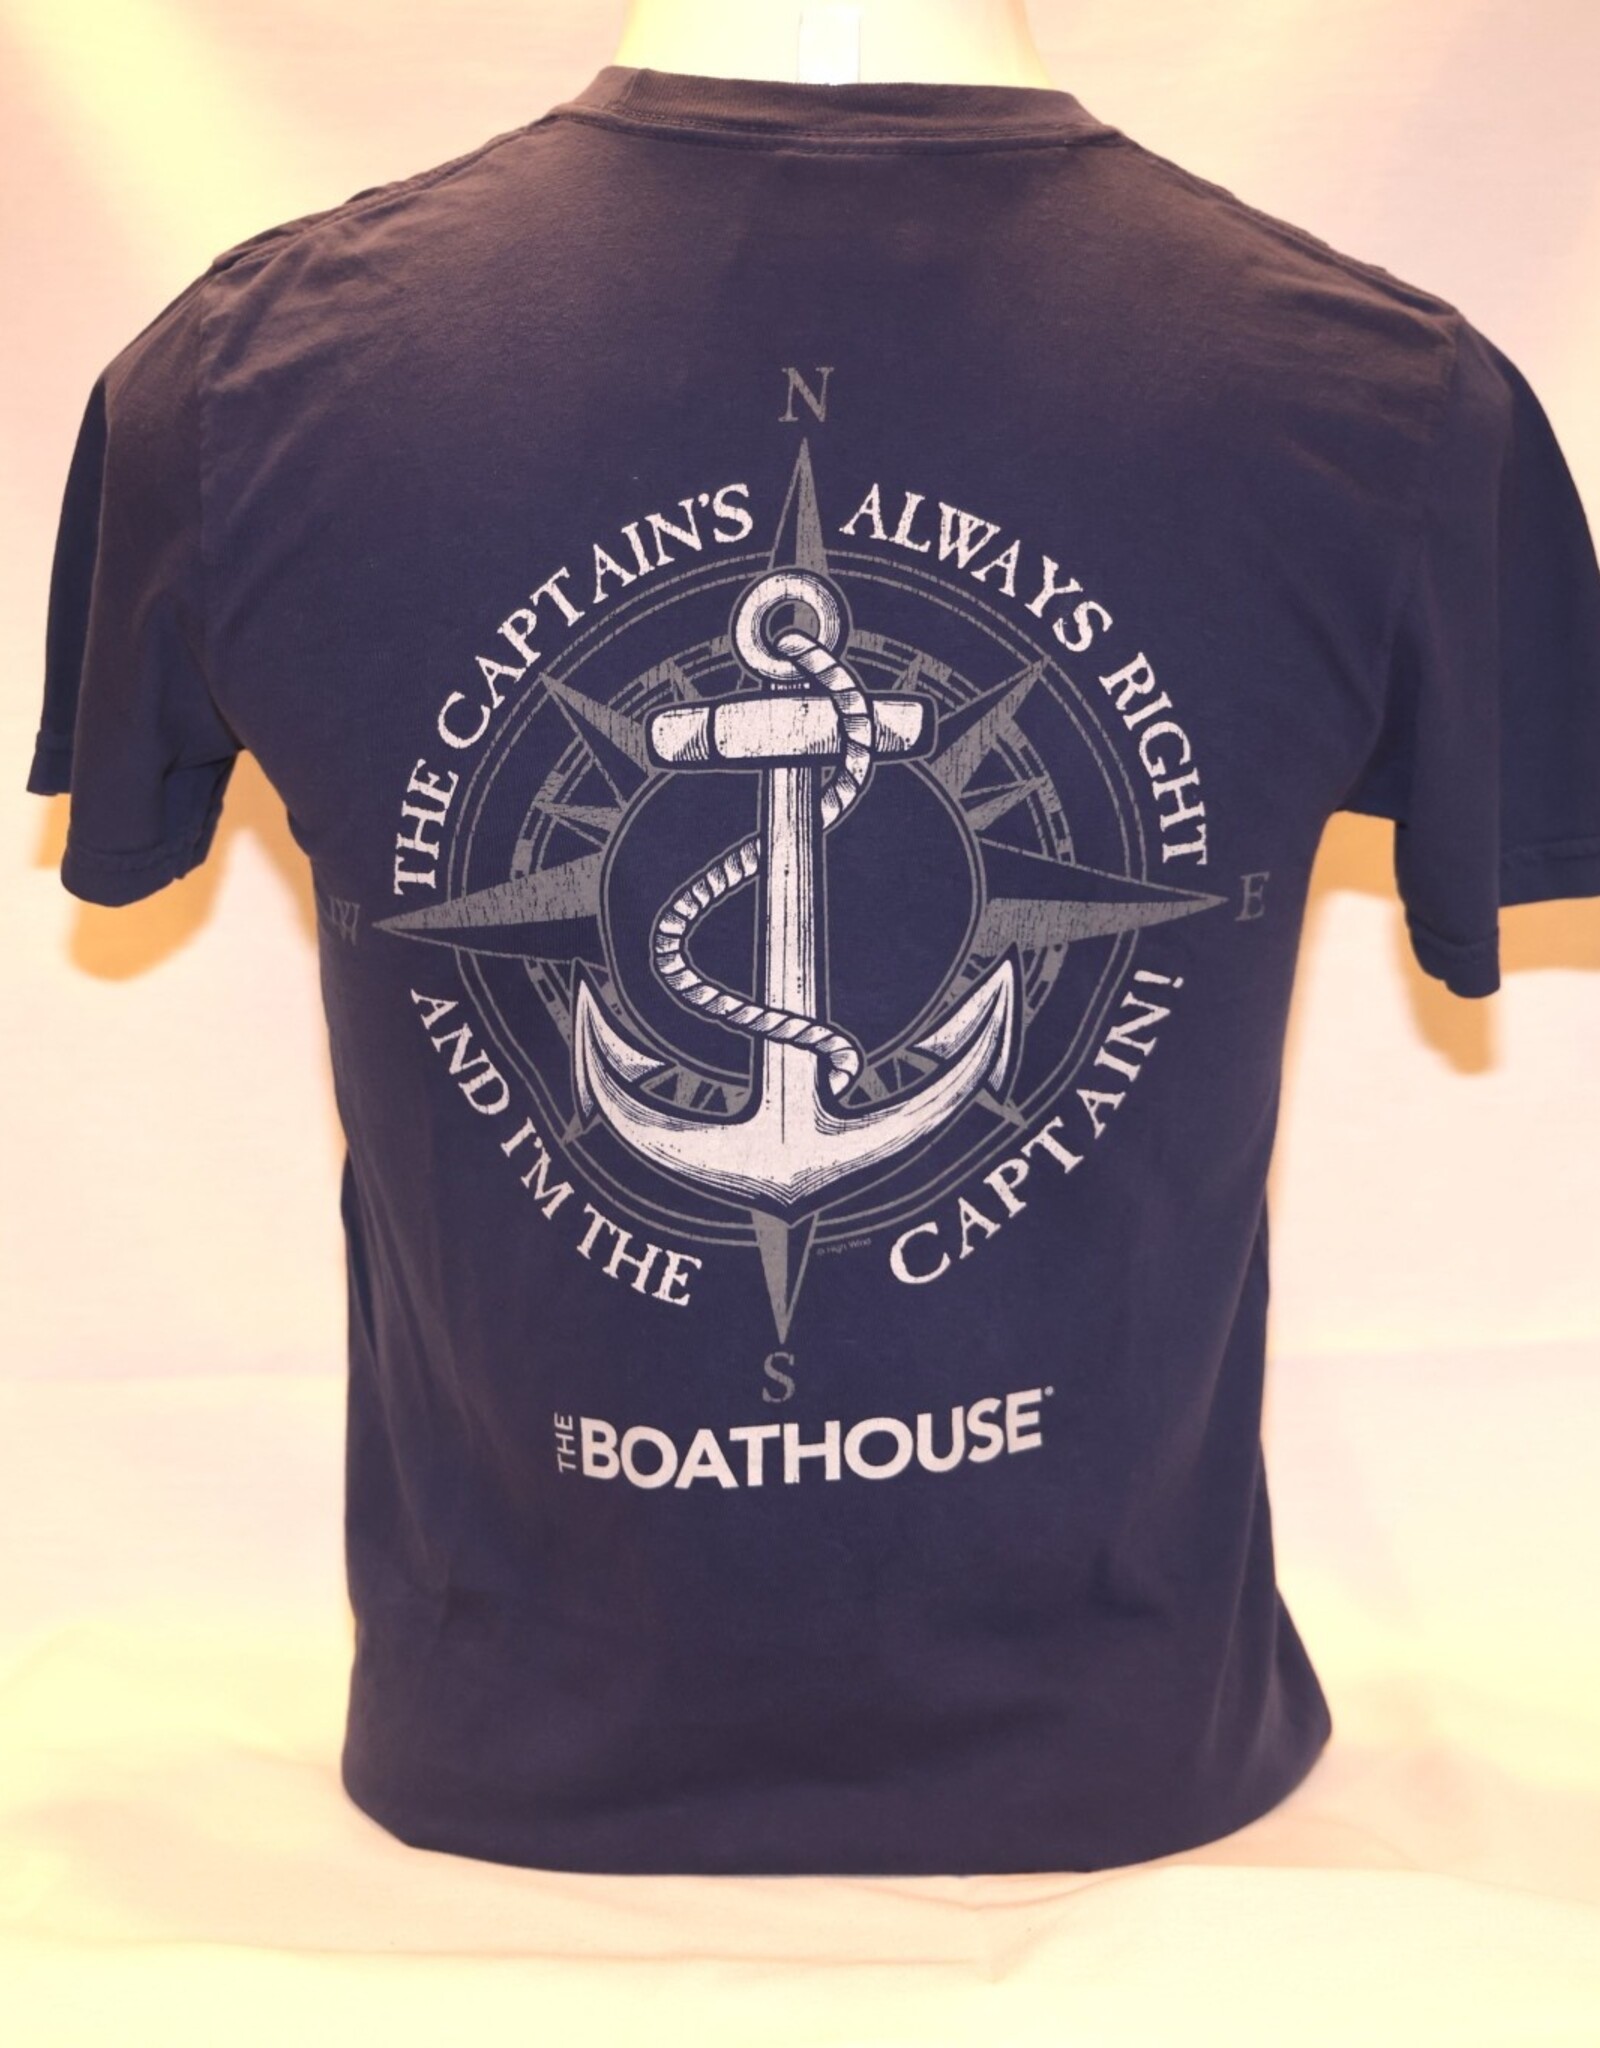 BH ANCHOR THE CAPTAIN'S ALWAYS RIGHT - The BOATHOUSE Boatique